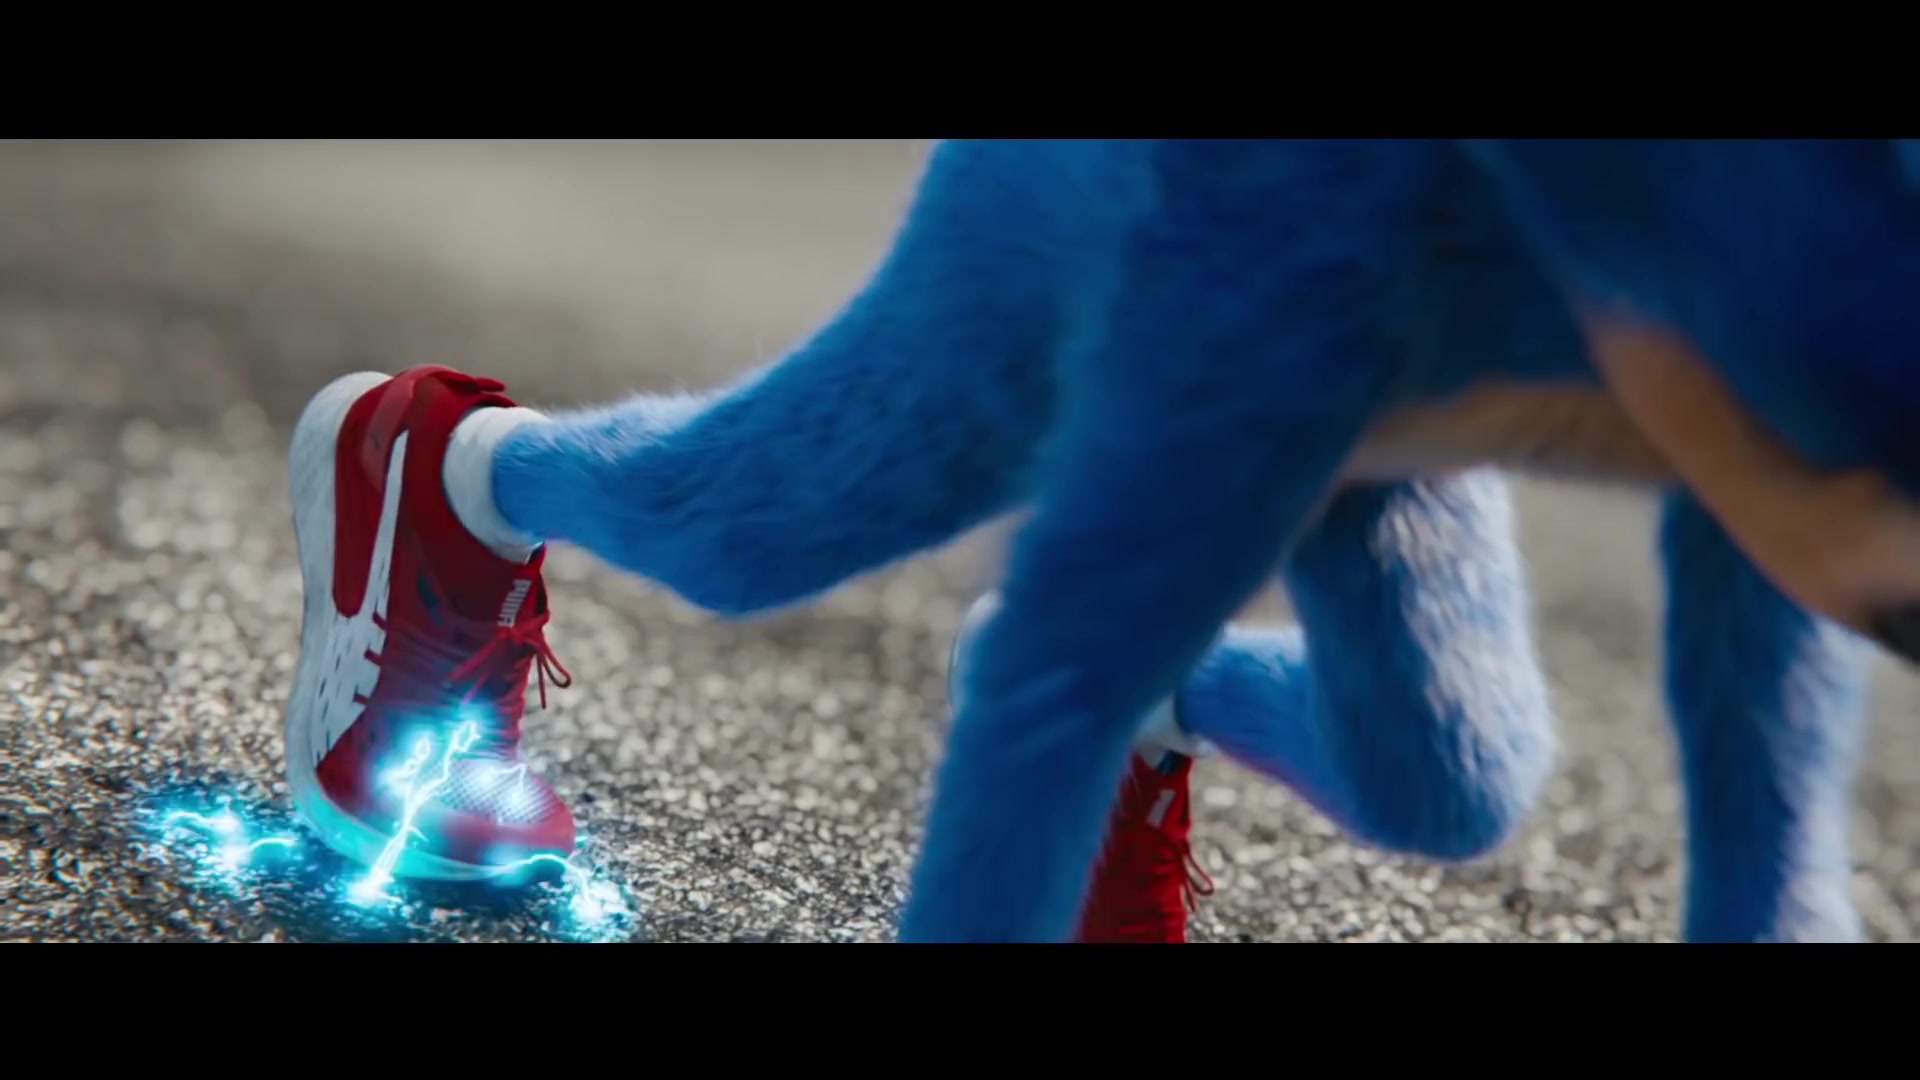 Puma Sneakers (Red) Worn by Sonic in Sonic the Hedgehog (Trailer) (2020) Movie1920 x 1080